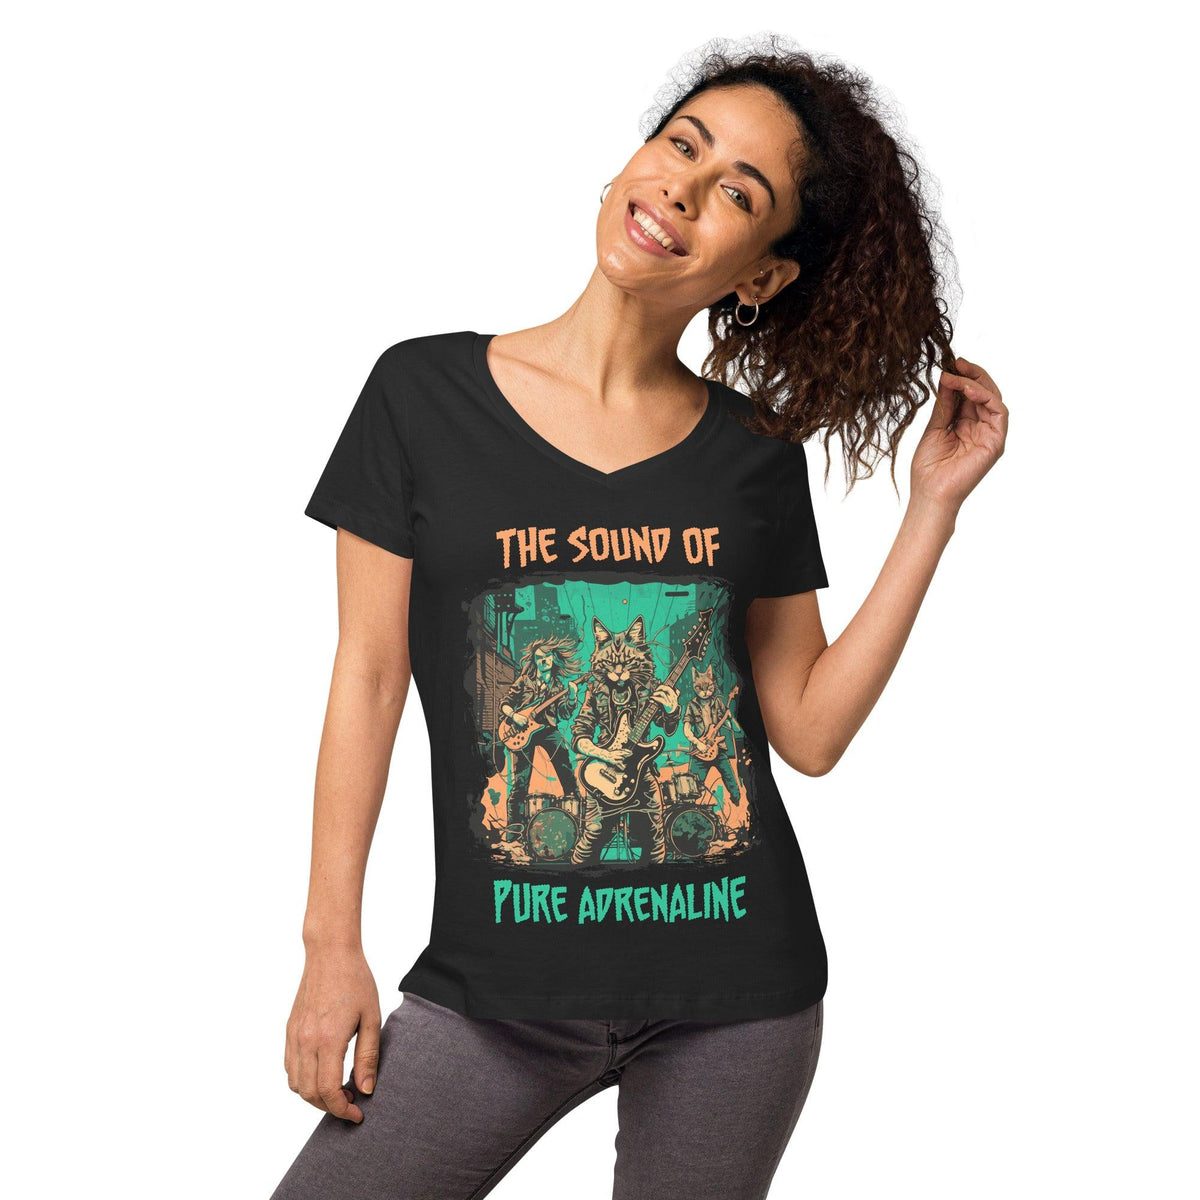 Sound Of Adrenaline Women’s fitted v-neck t-shirt - Beyond T-shirts